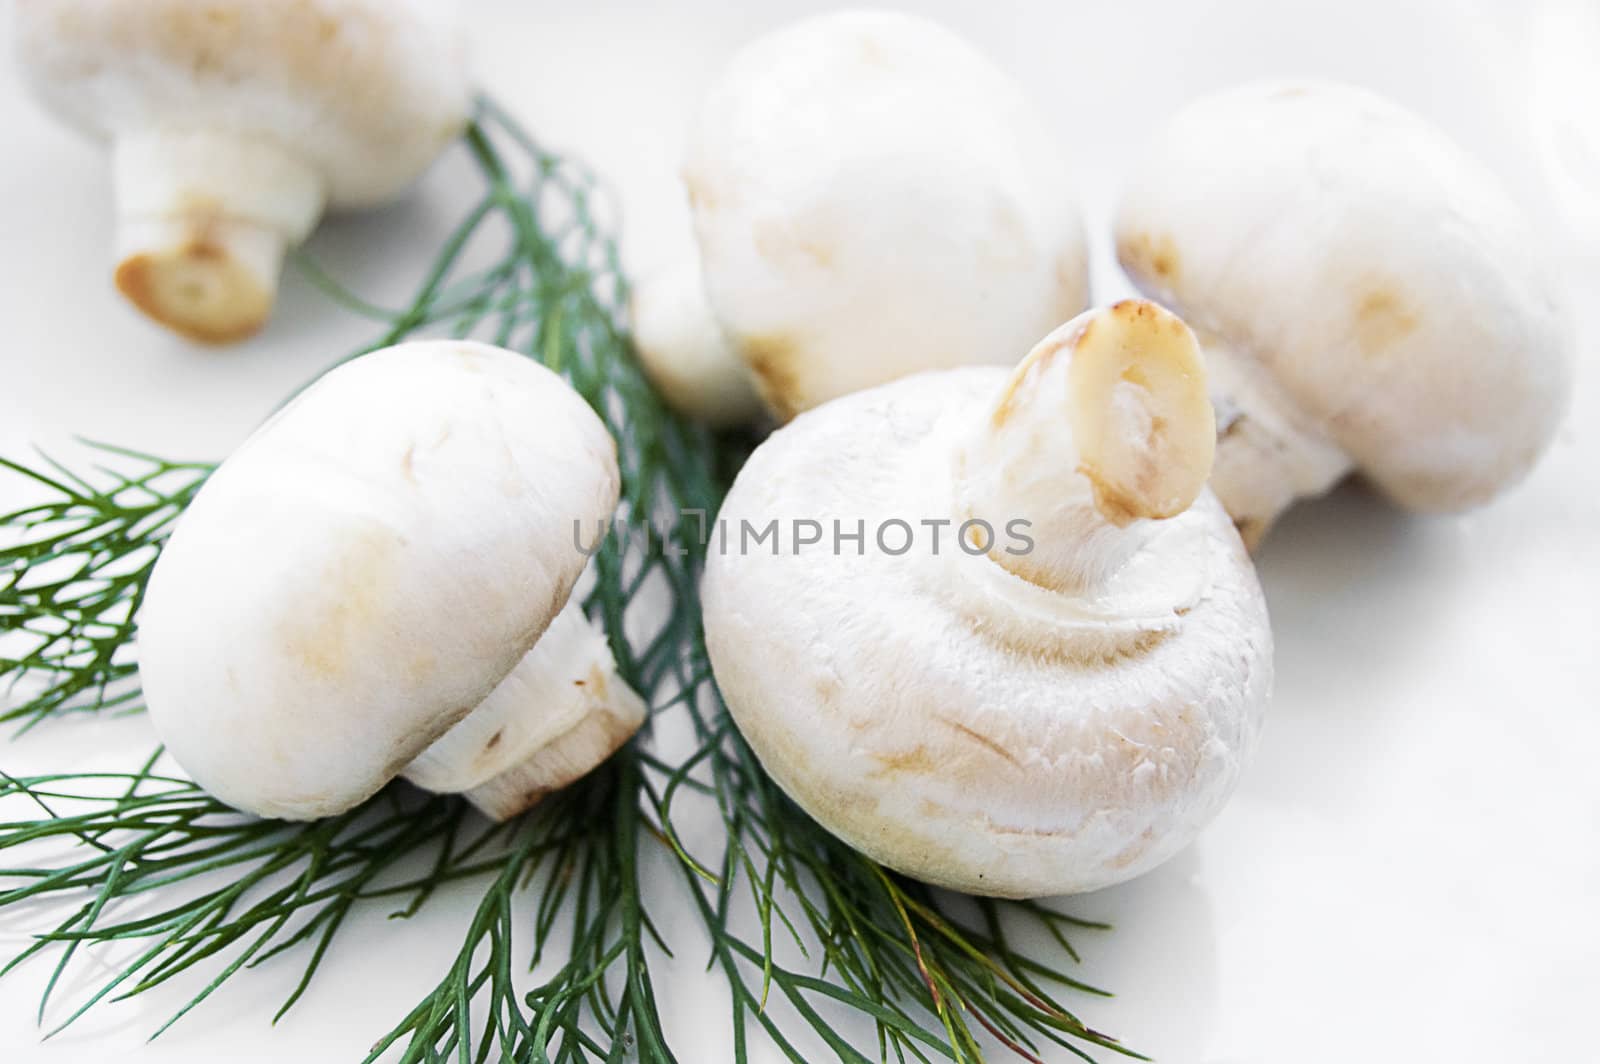 Mushroom champignon with green parsley isolated on white